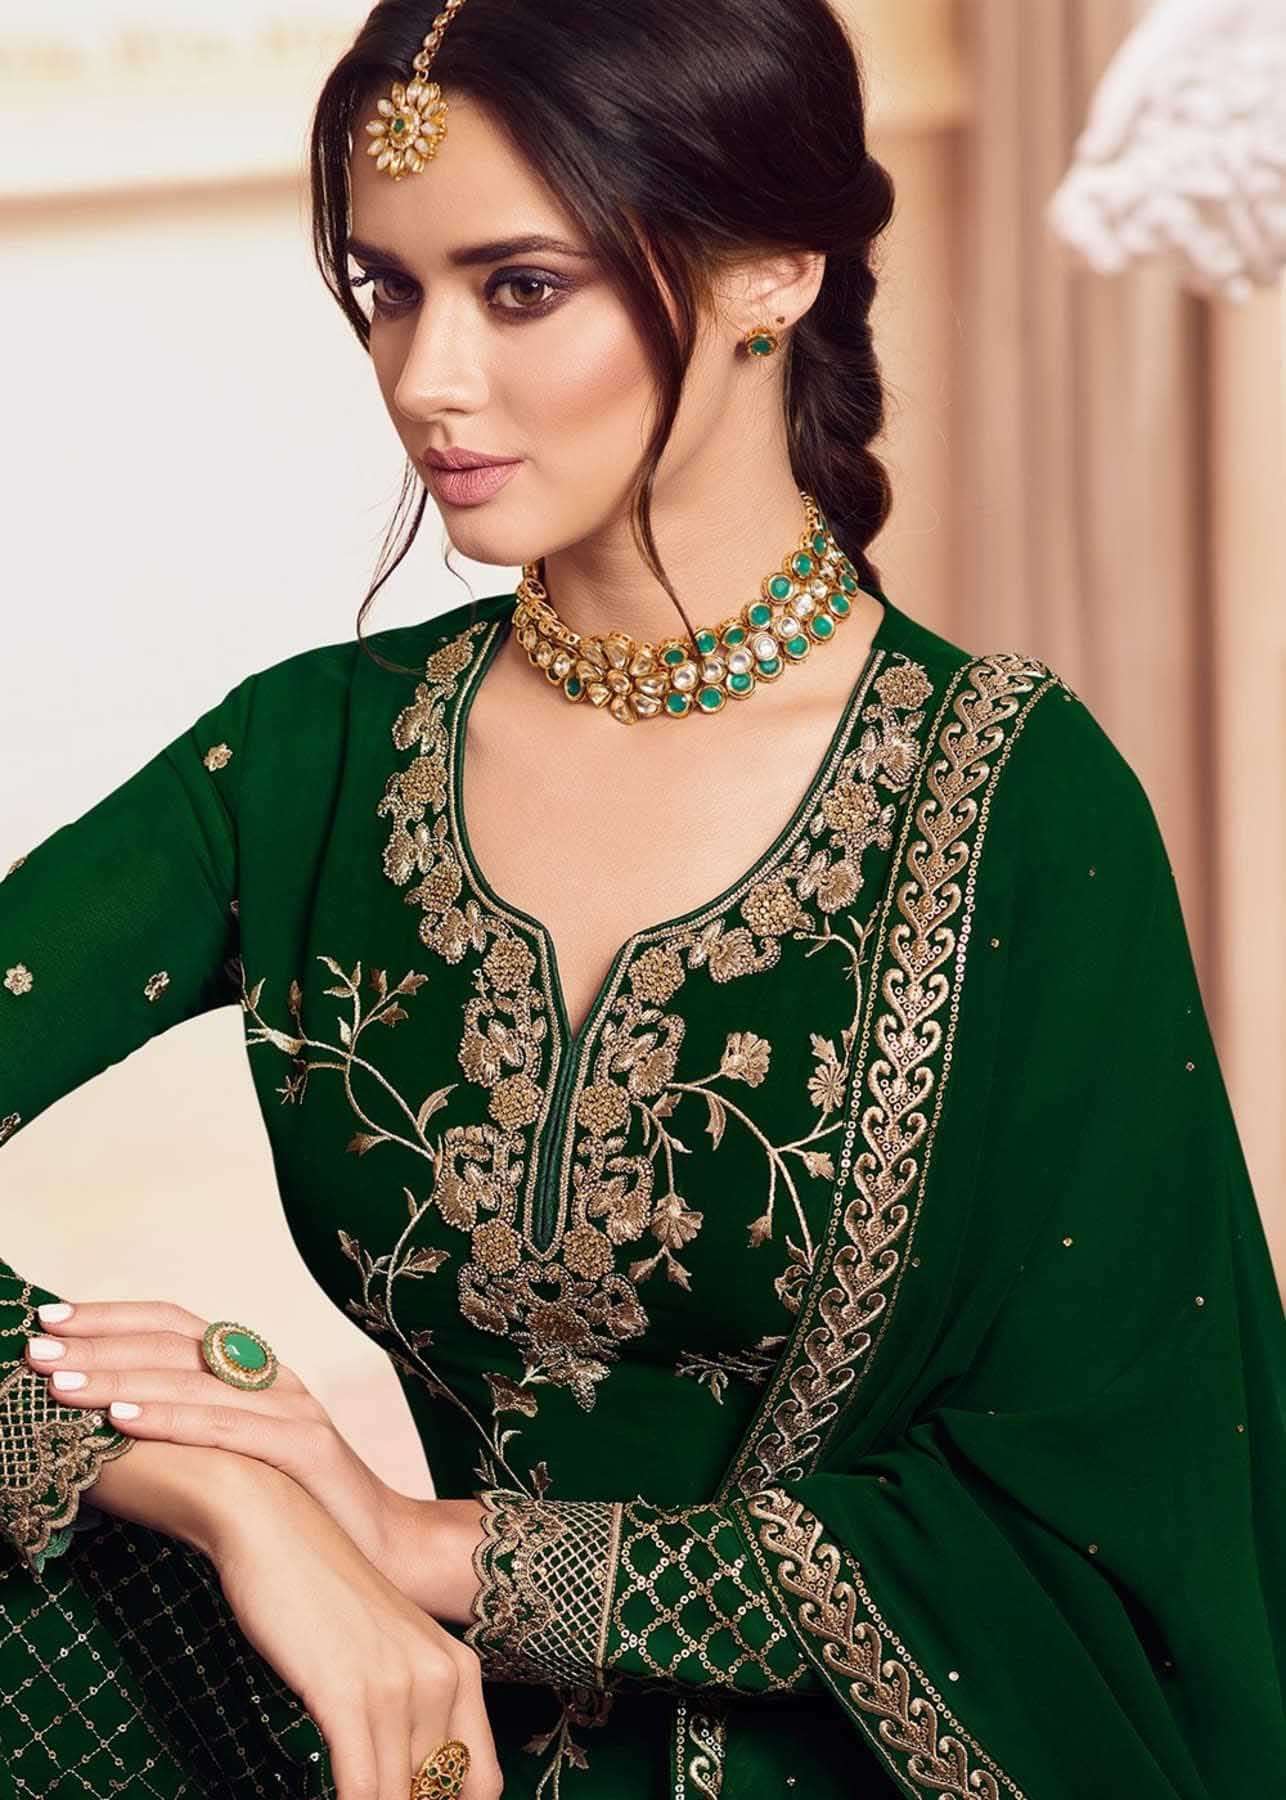 Women's Look Stunning With Designer Green Color Bridal Sharara Suit